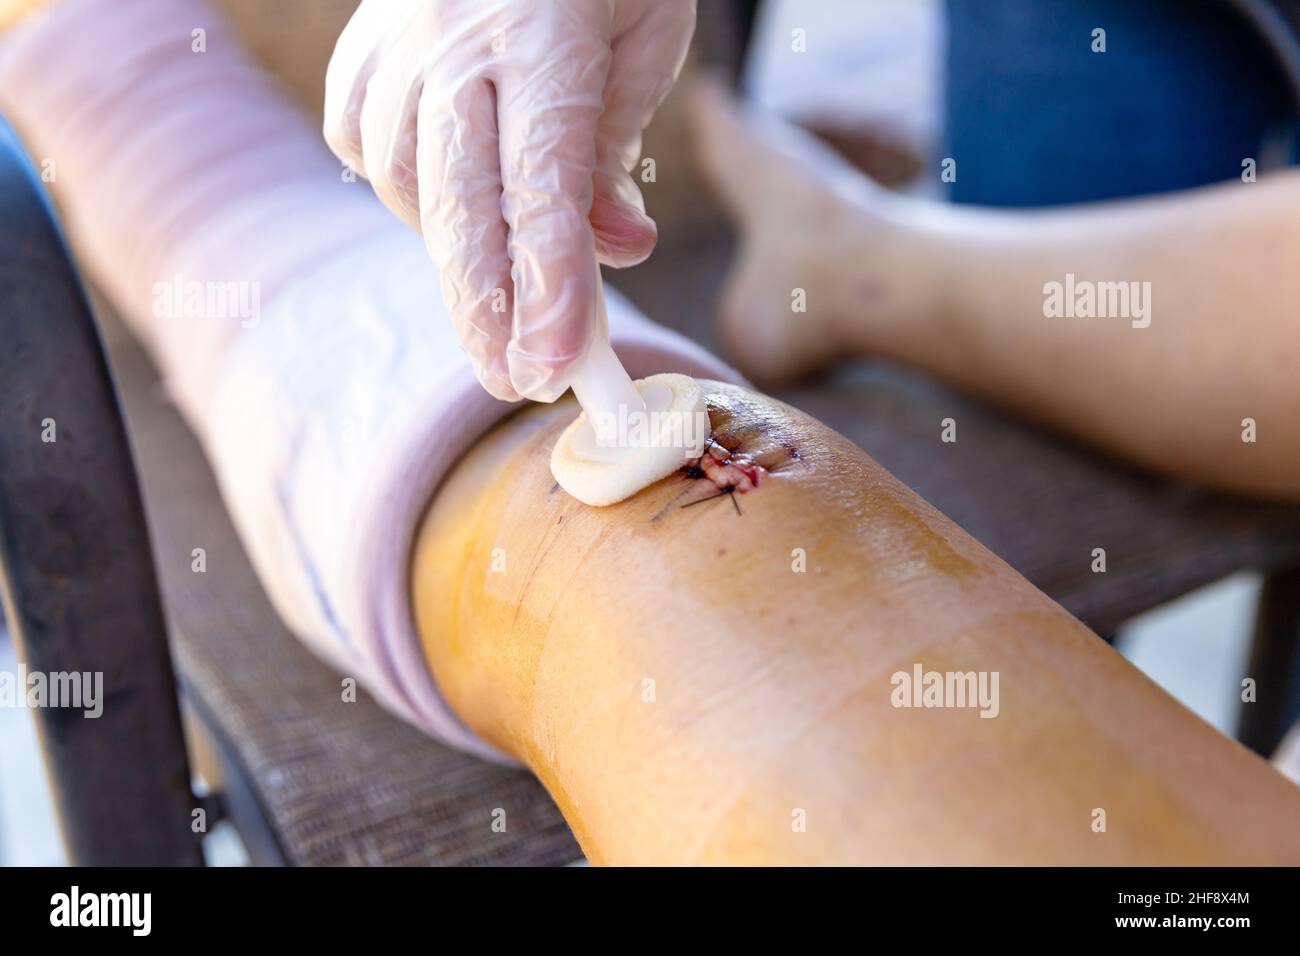 cleaning incision and wound after surgery Stock Photo